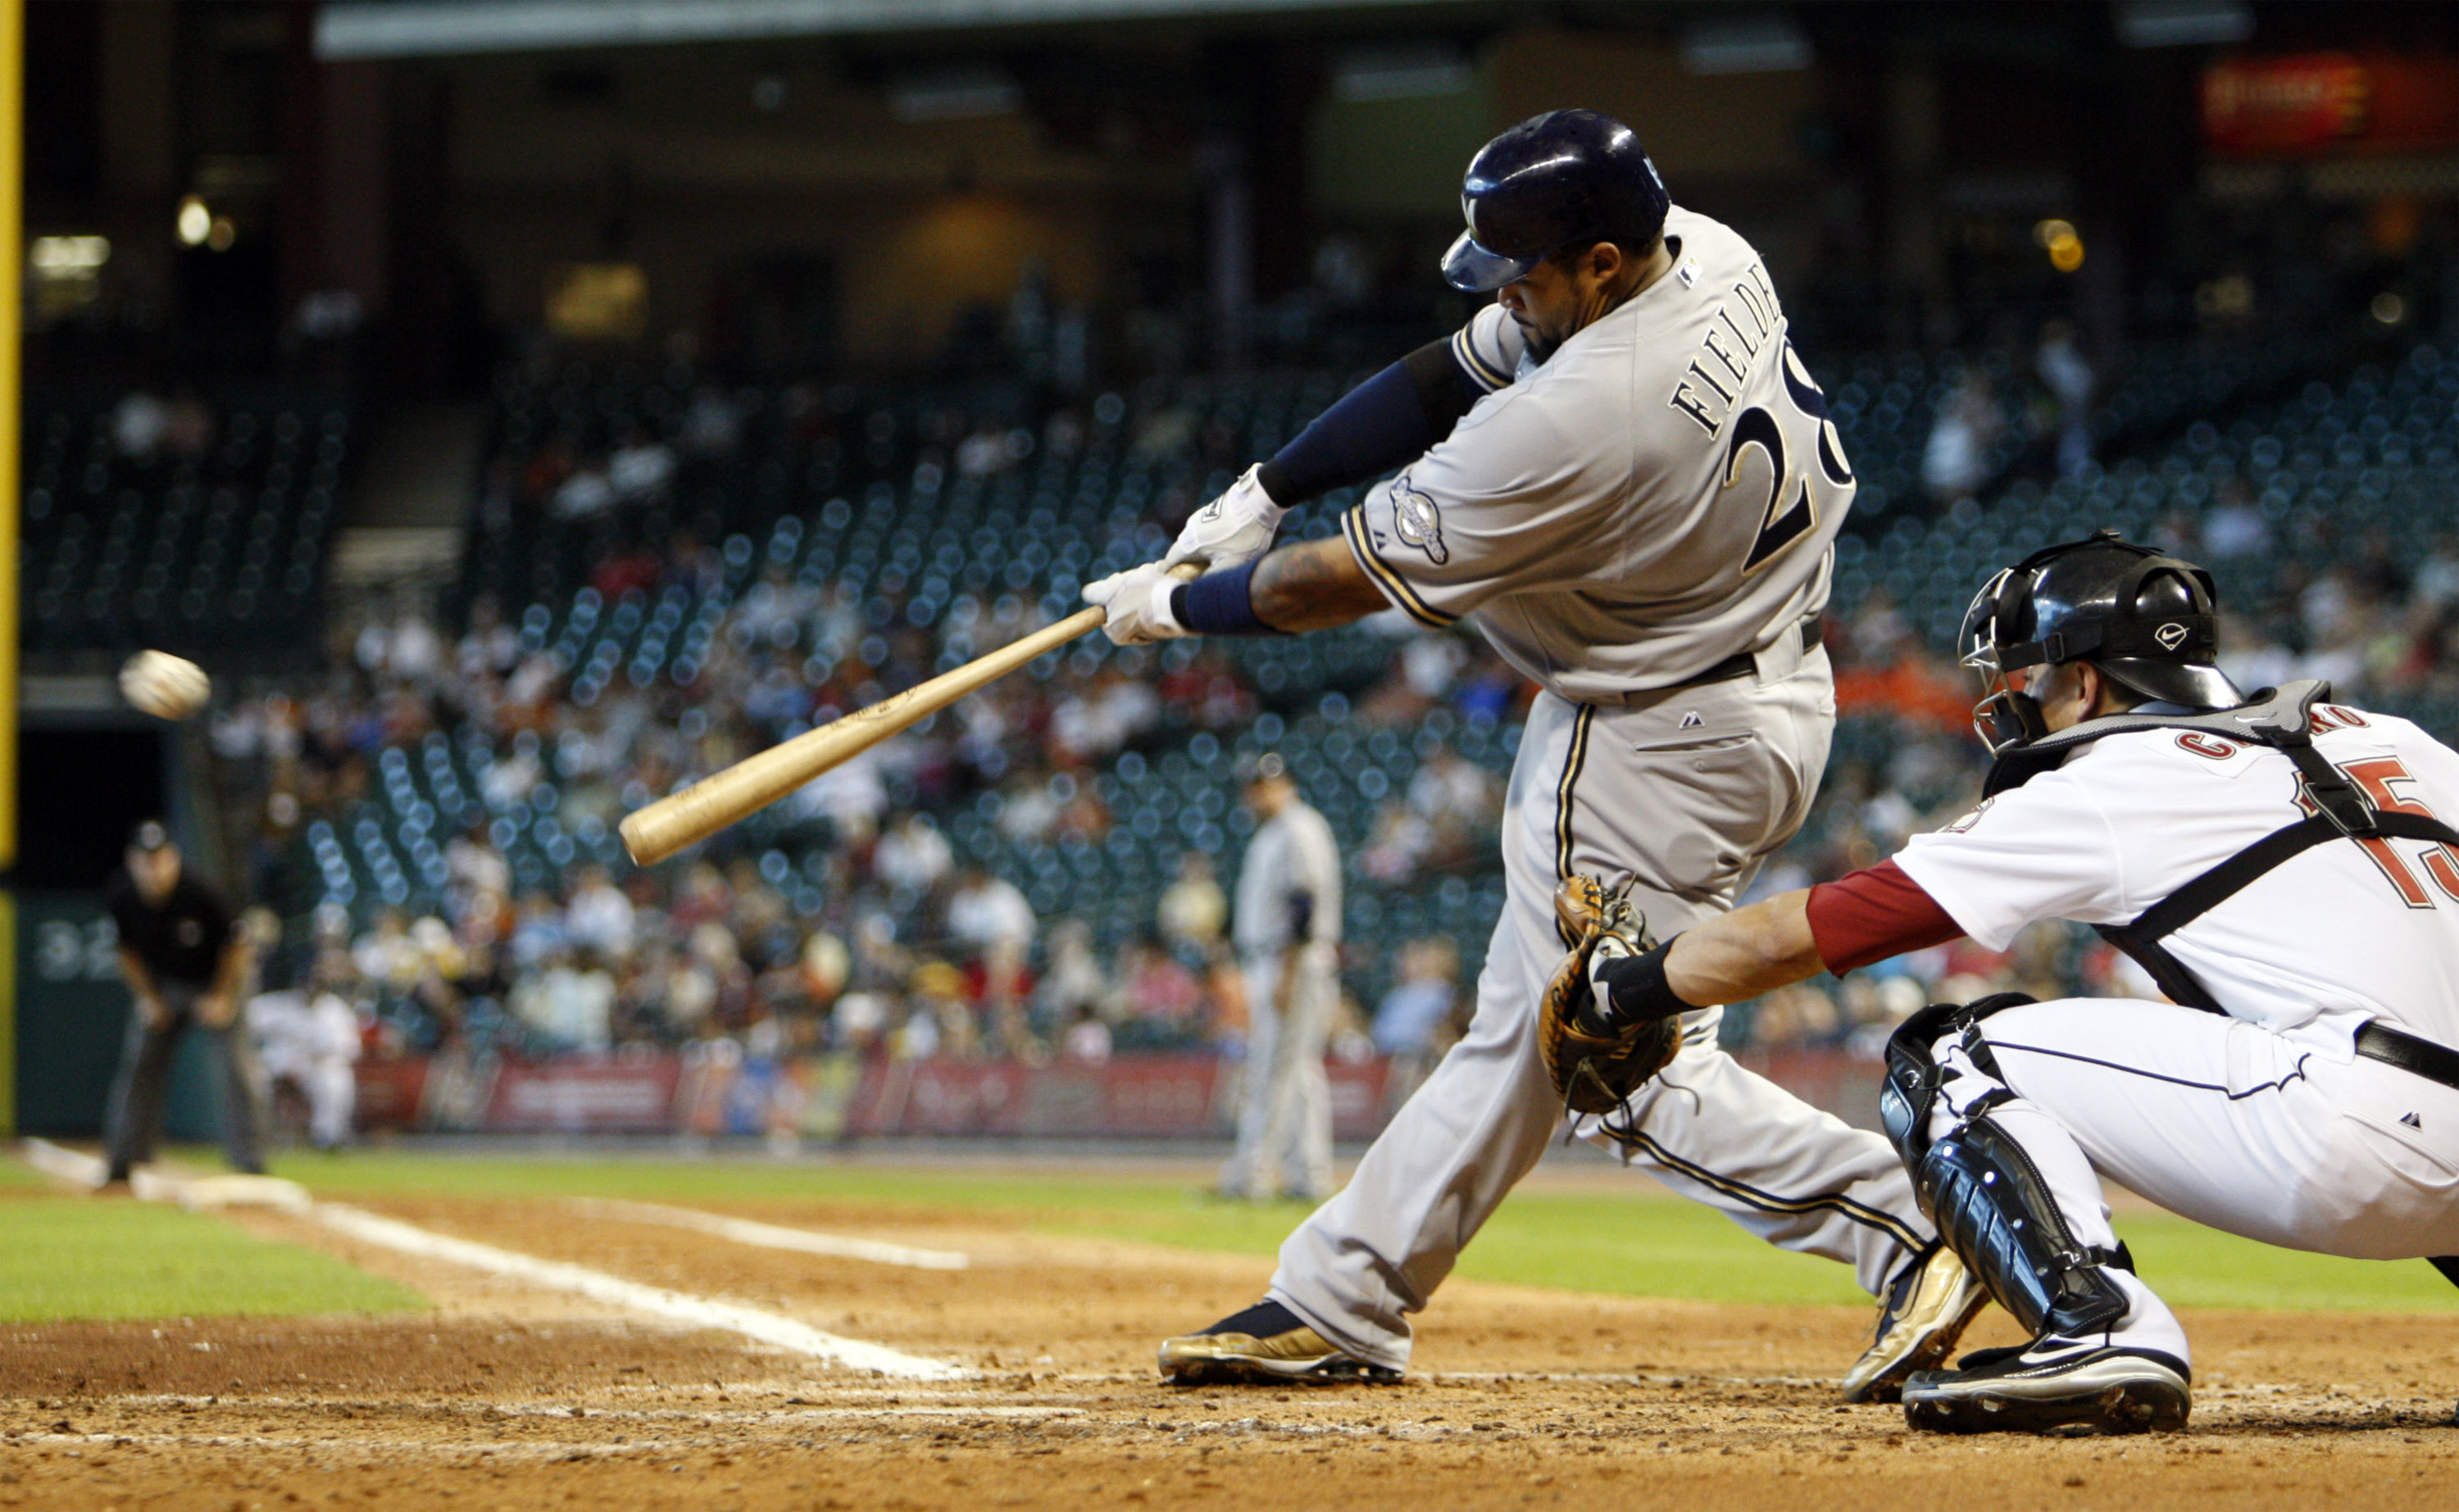 HOUSTON - SEPTEMBER 15:  Prince Fielder #28 of the Milwaukee Brewers hits a soft line drive to left field in the fifth inning against the Houston Astros on September 15, 2010 in Houston, Texas.  (Photo by Bob Levey/Getty Images)